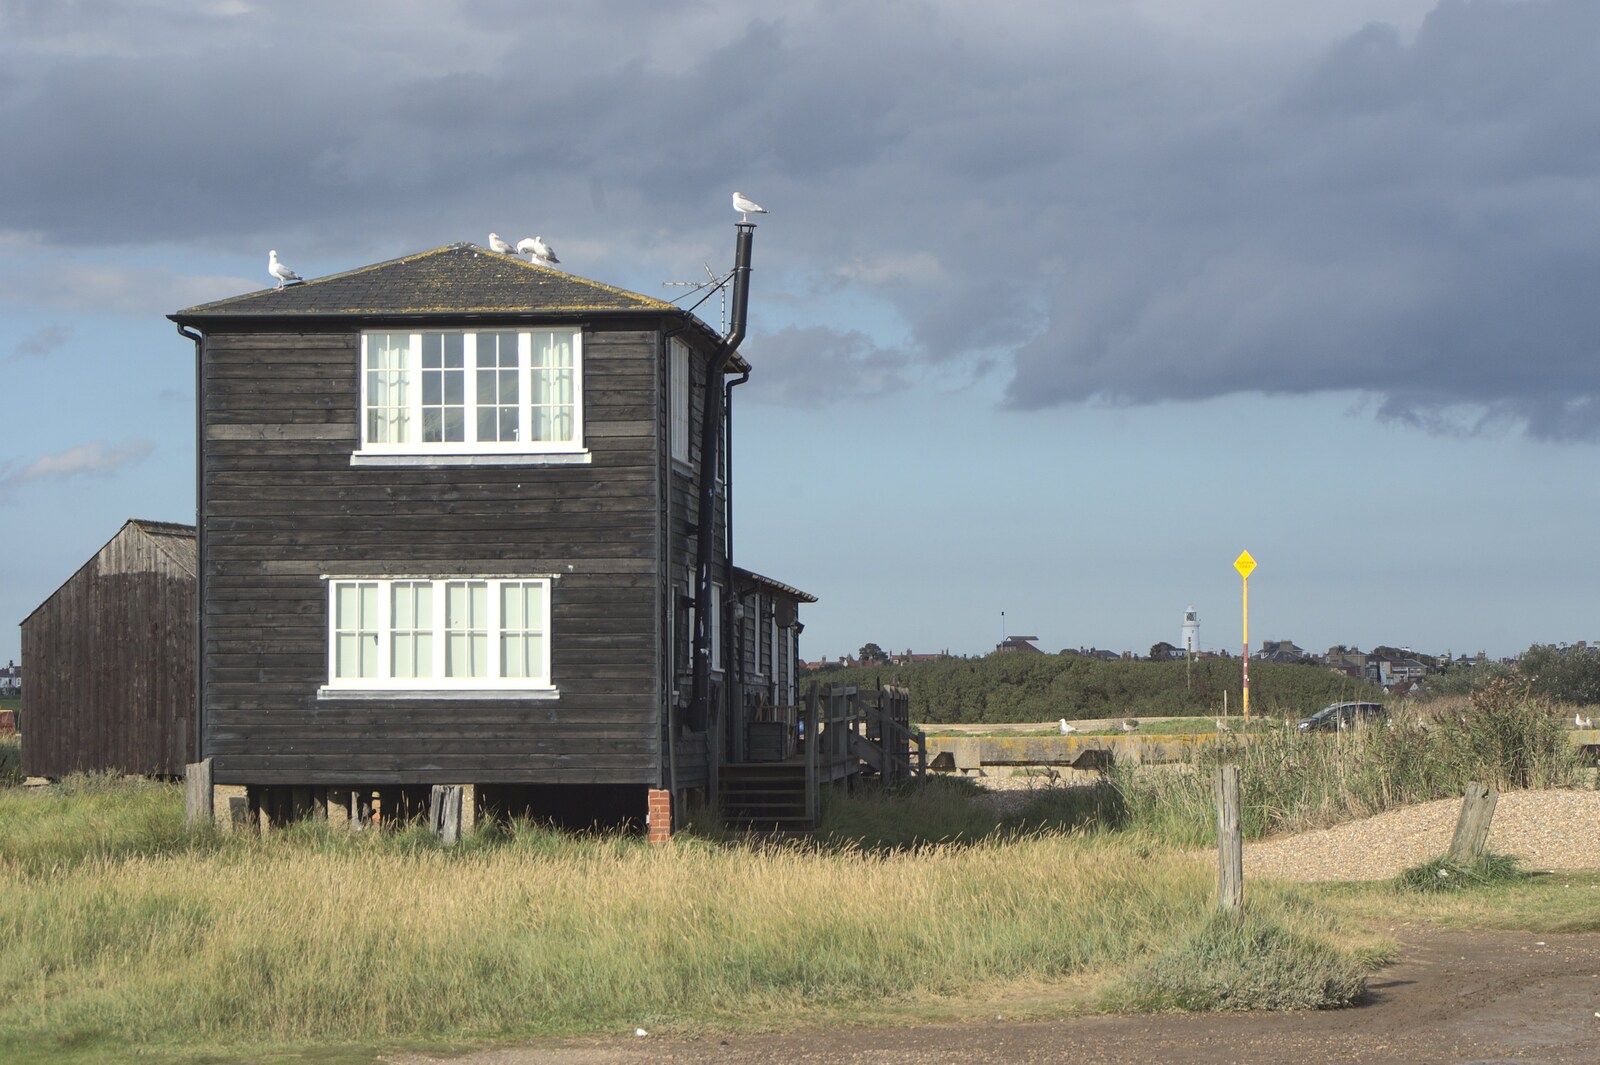 A Trip to Walberswick, Suffolk - 12th September 2010: Dark clouds and a house on stilts